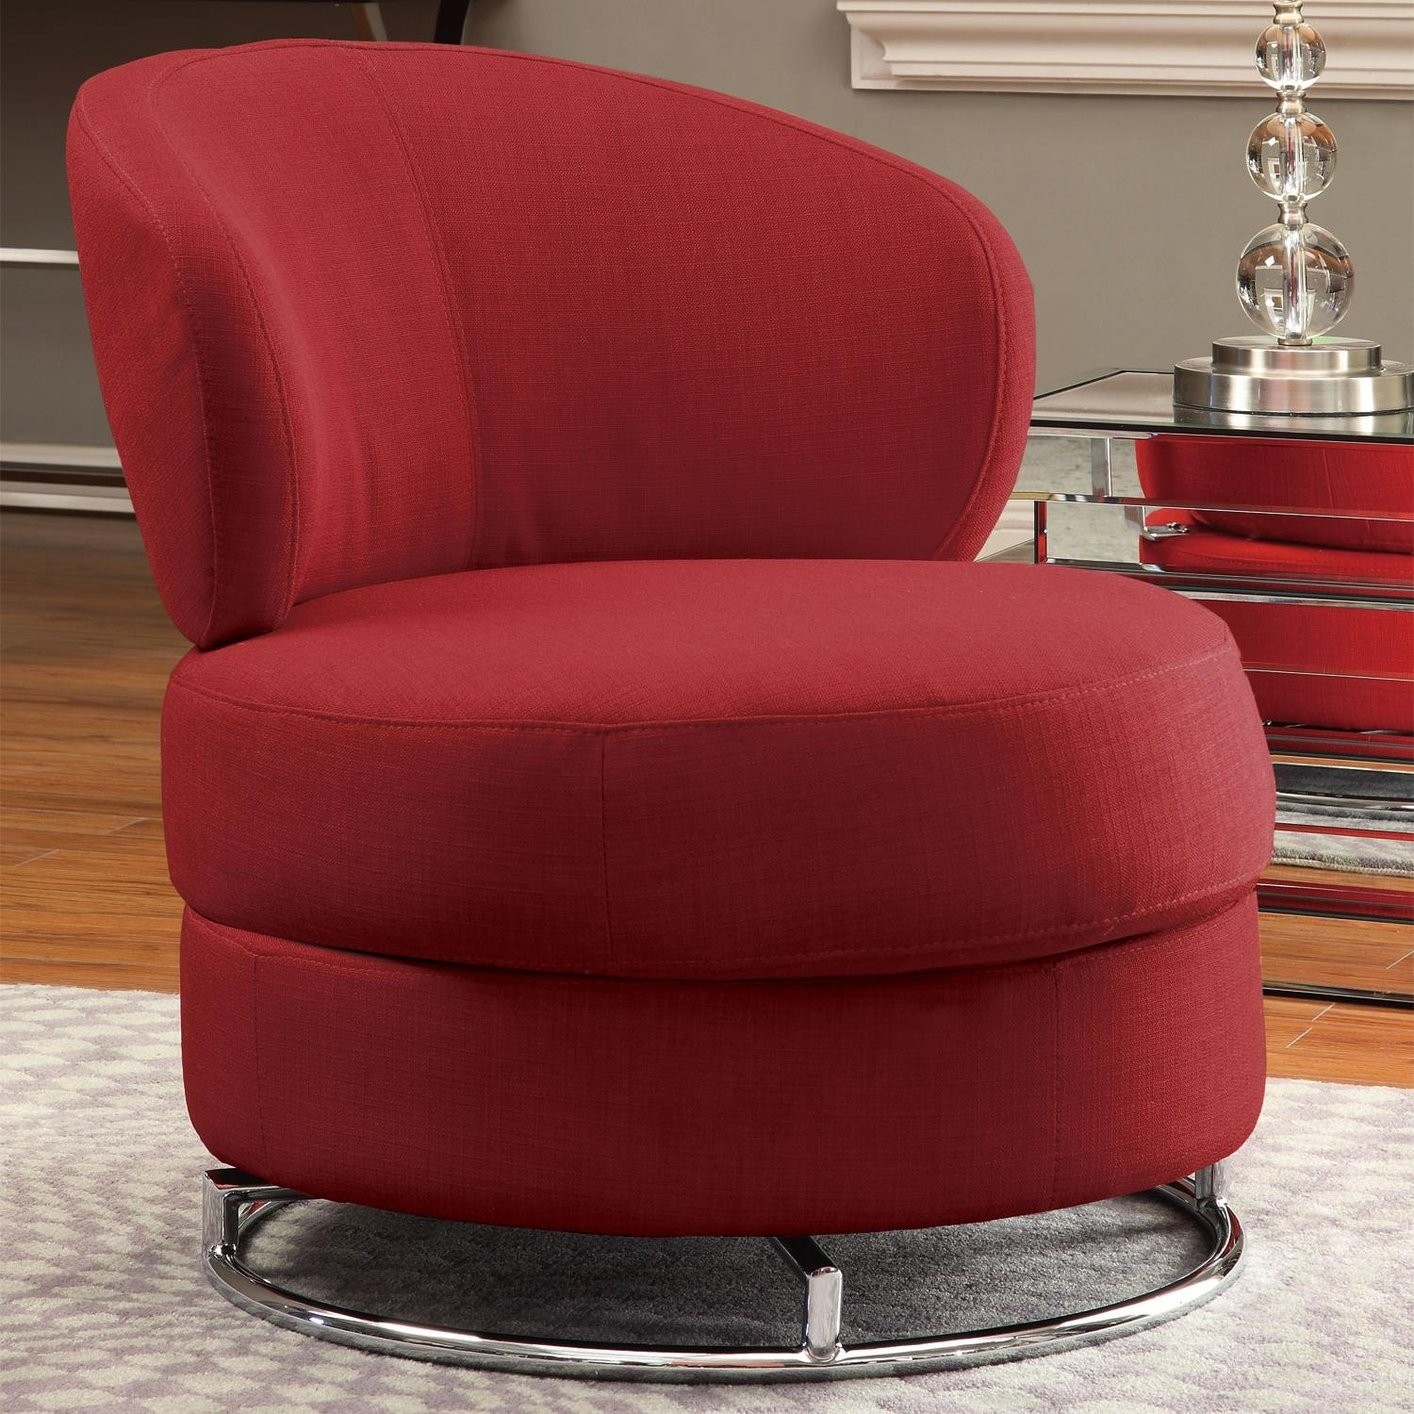 Red fabric swivel chair steal a sofa furniture outlet